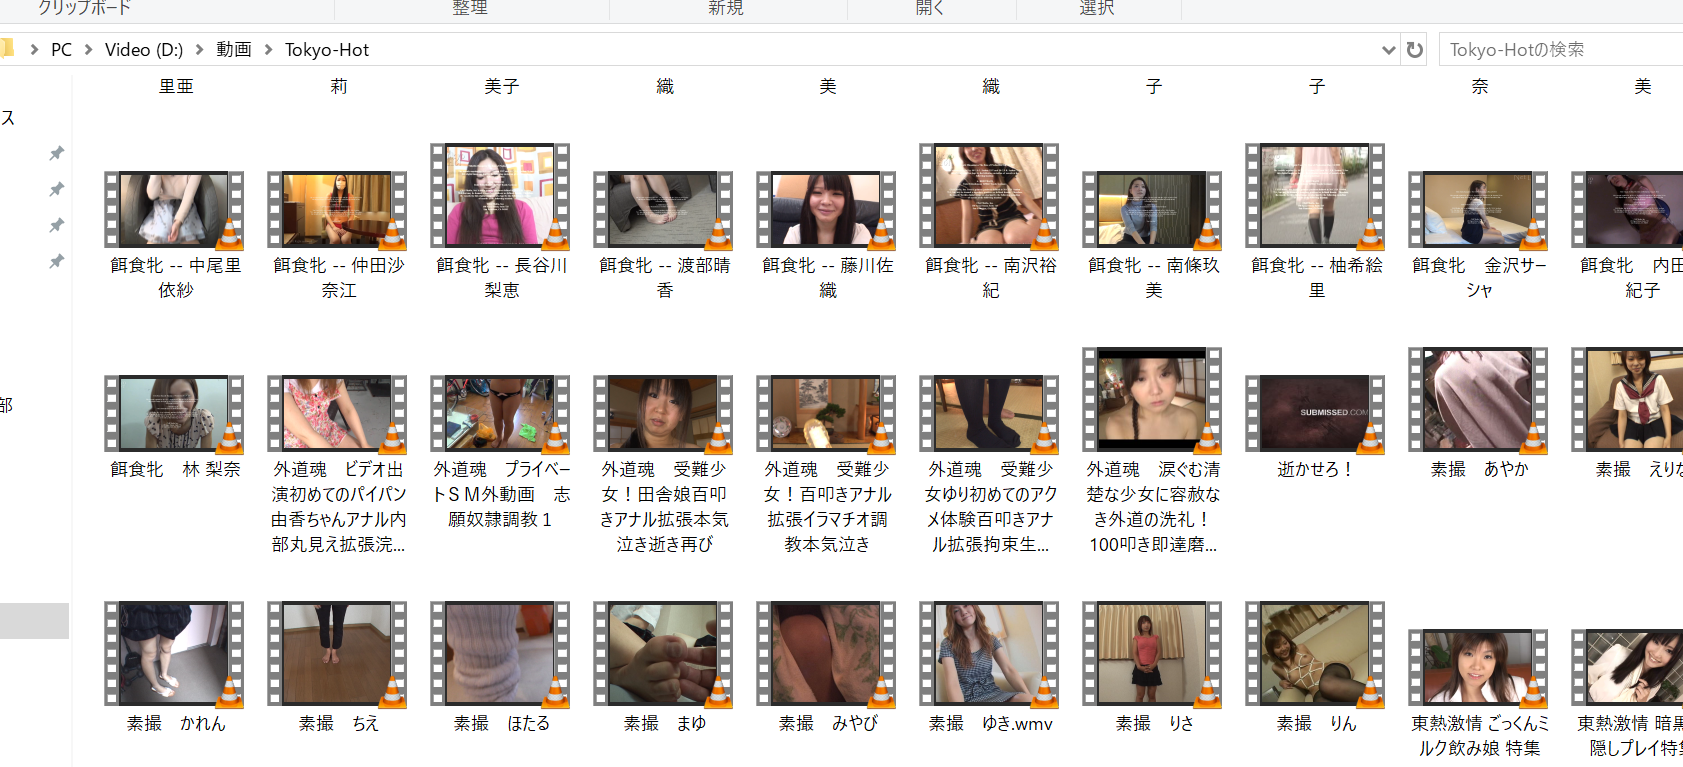 some of the uncensored JAV erotic videos I downloaded when I was a Tokyo-Hot member